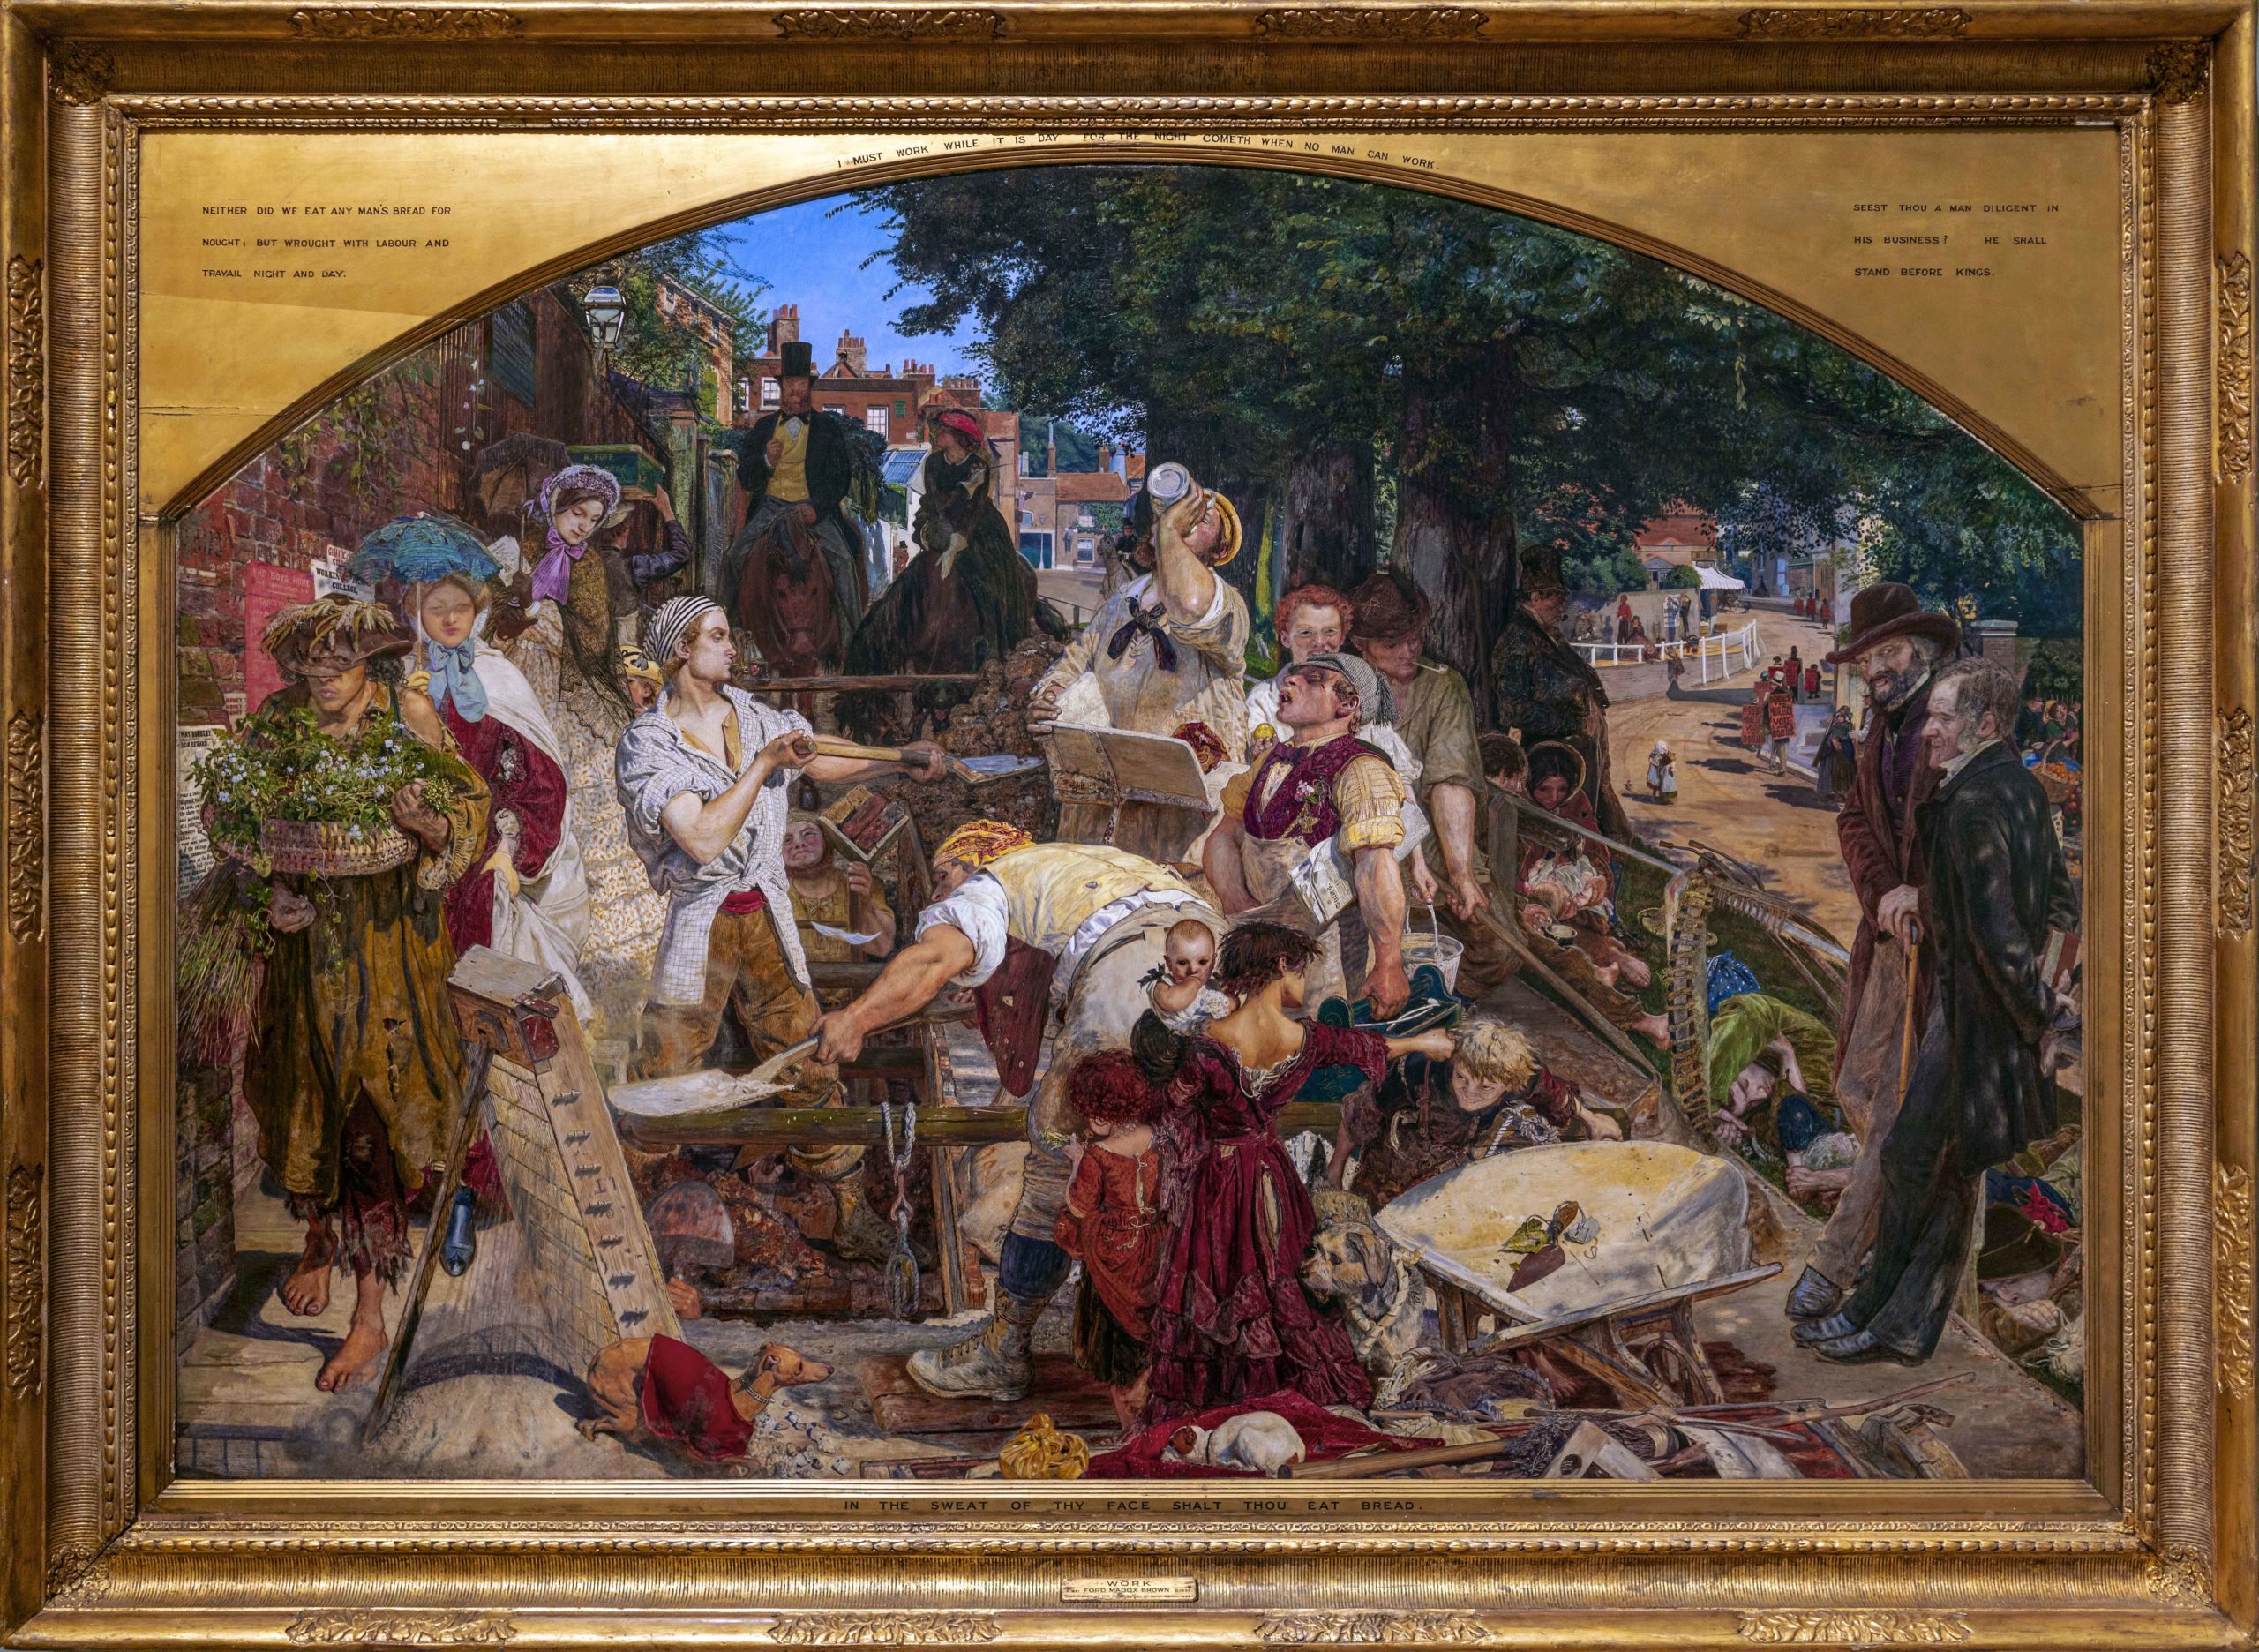 Ford Madox Brown, Work, 1852-65, oil on canvas, 137 x 198 cm (Manchester Art Gallery)